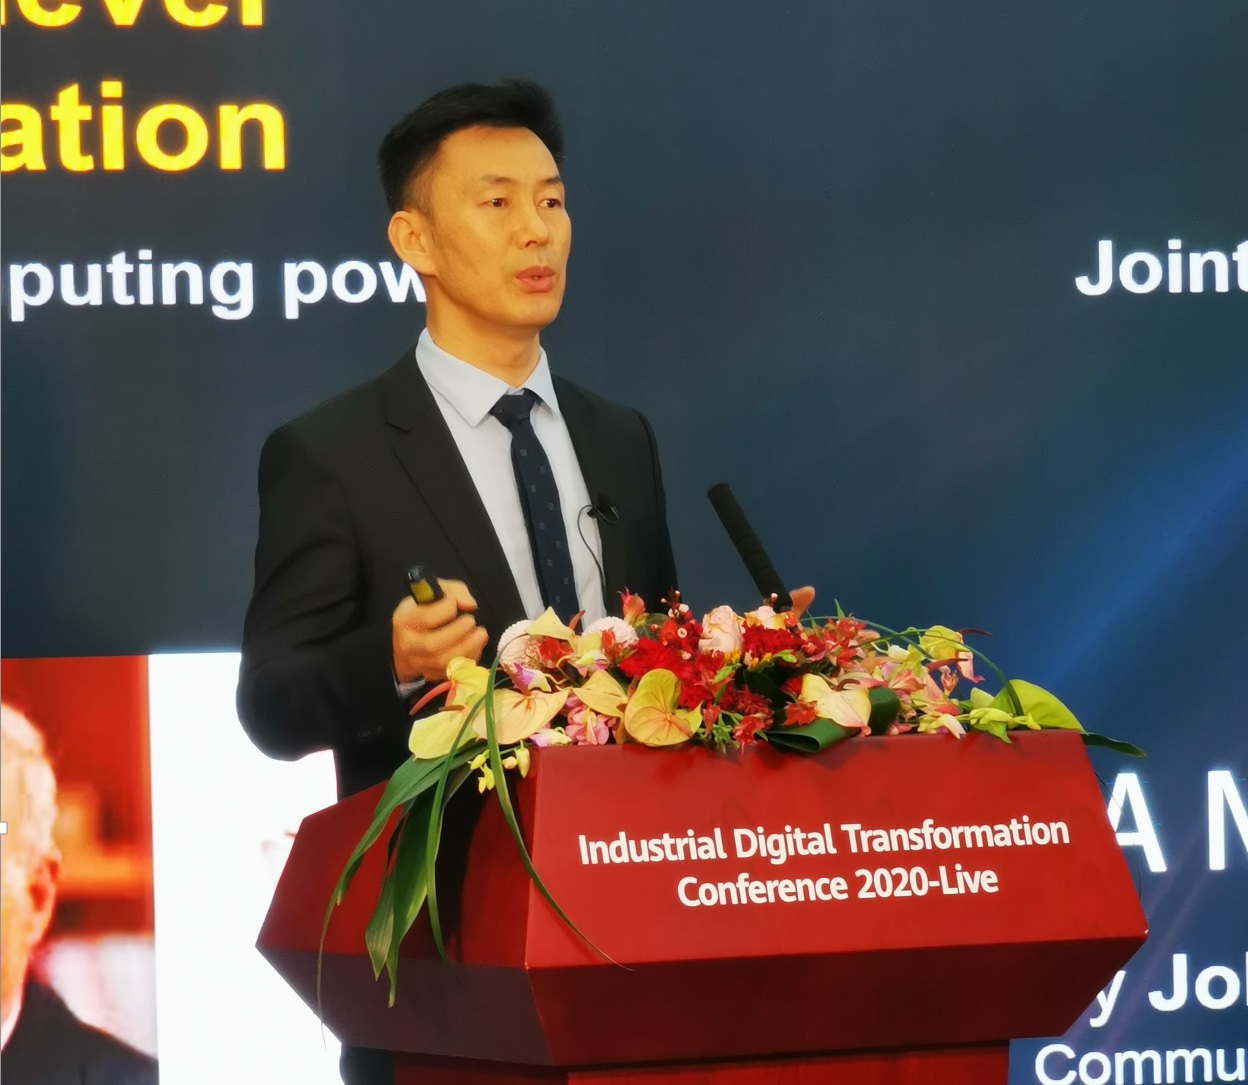 Huang Jin, VP of Huawei Cloud & AI BG, delivering his keynote speech at the Industrial Digital Transformation Conference